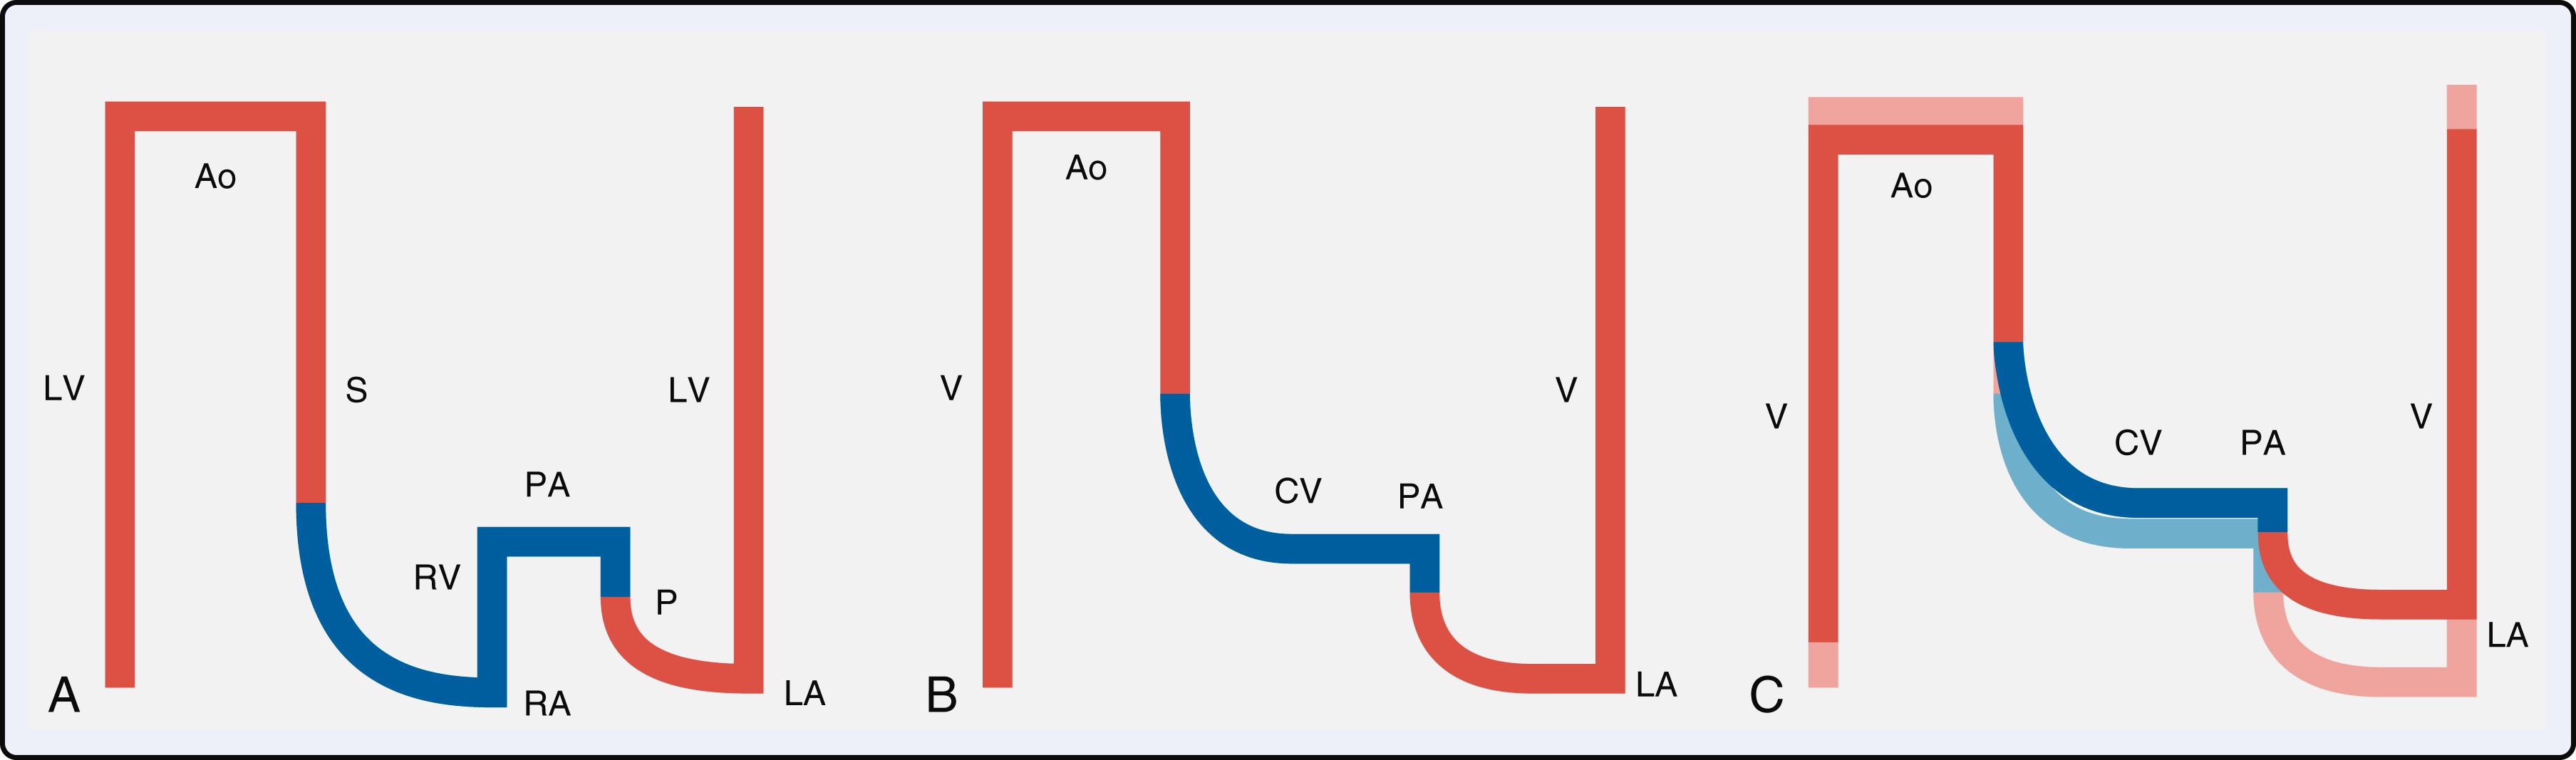 Figure 16.6, Diagram of normal cardiovascular circulation and Fontan circulation at early and late stages. (A) Normal biventricular circulation. The pulmonary circulation (P) is connected in series to the systemic circulation (S) . The right ventricle (RV) ensures that the right atrial pressure remains lower than the left atrial pressure and delivers the driving force to the blood to overcome pulmonary impedance. (B) Fontan circuit. The caval veins are directly connected to the pulmonary artery (PA) ; systemic venous pressures are markedly elevated. (C) Late Fontan circuit (superimposed on early Fontan circuit). With time, a negative spiral occurs. As pulmonary vascular resistance increases there is an increase in caval vein (CV) pressure leading to systemic venous congestion. Despite this increase in driving pressure there is a decrease in flow to the systemic ventricle leading to chronic volume underload. Chronic volume underload and lack of fiber stretch lead to a decrease contractility and an increase in muscle stiffness (impaired diastolic function) resulting in increasing ventricular filling pressures. Line thickness reflects output; color reflects oxygen saturation. Ao , Aorta; LA , left atrium; LV , left ventricle; RA , right atrium; V , single ventricle.